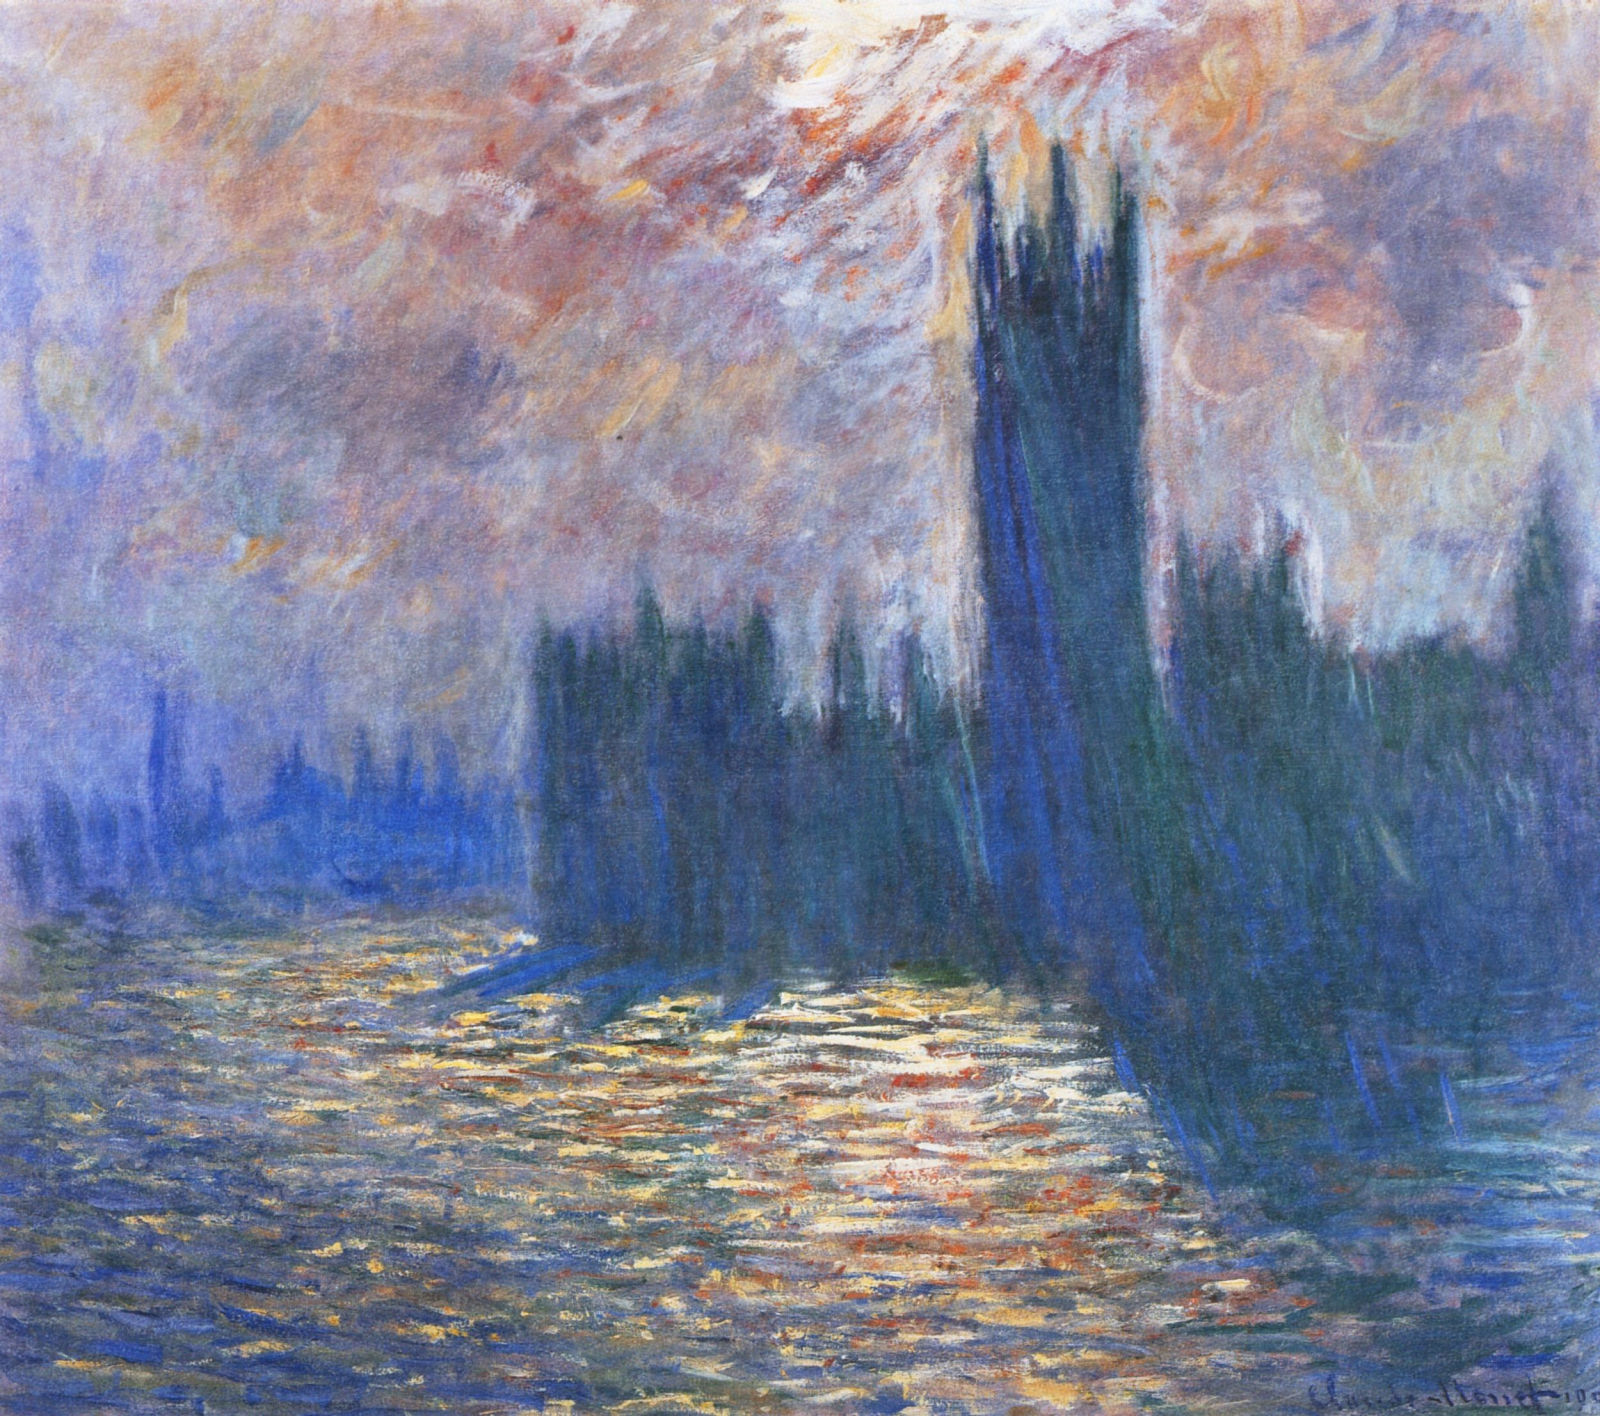 Parliament, Reflections on the Thames 1904